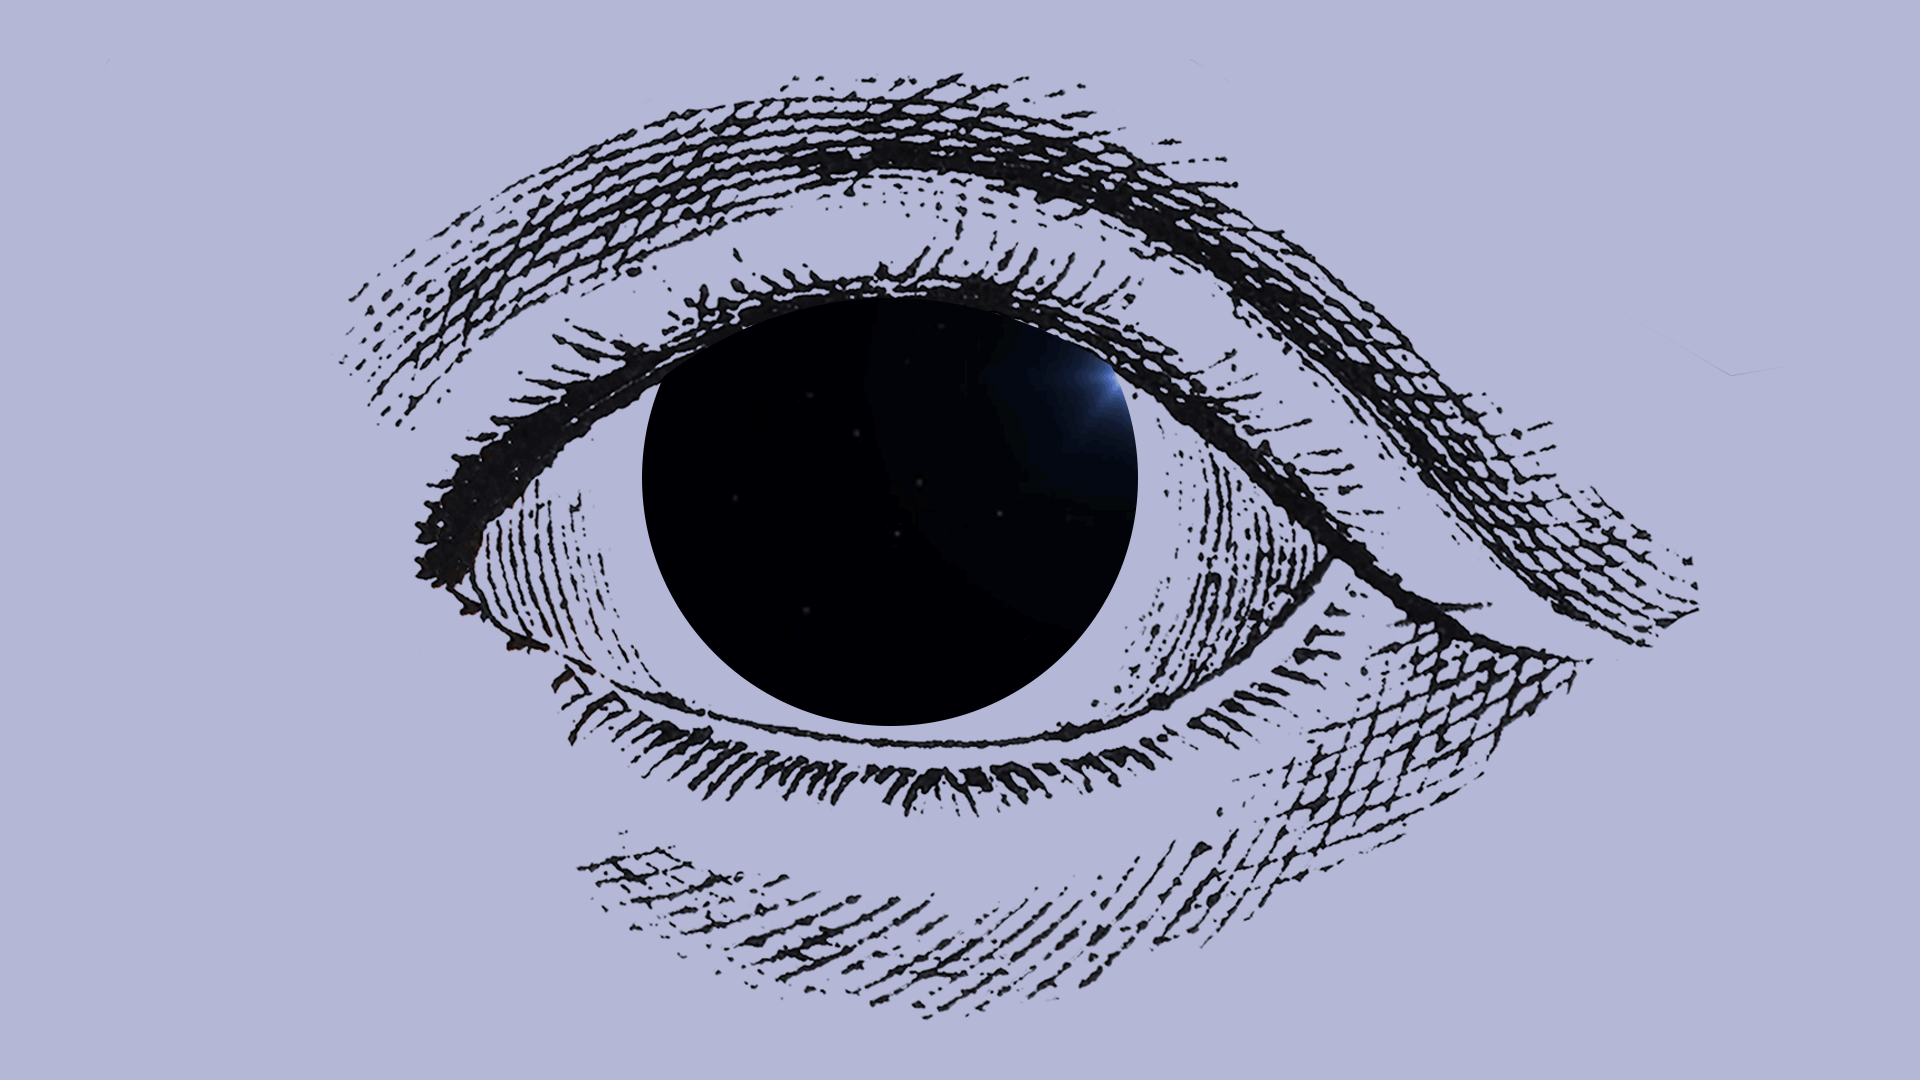 Engraved illustration of an eye with a comet crossing the center